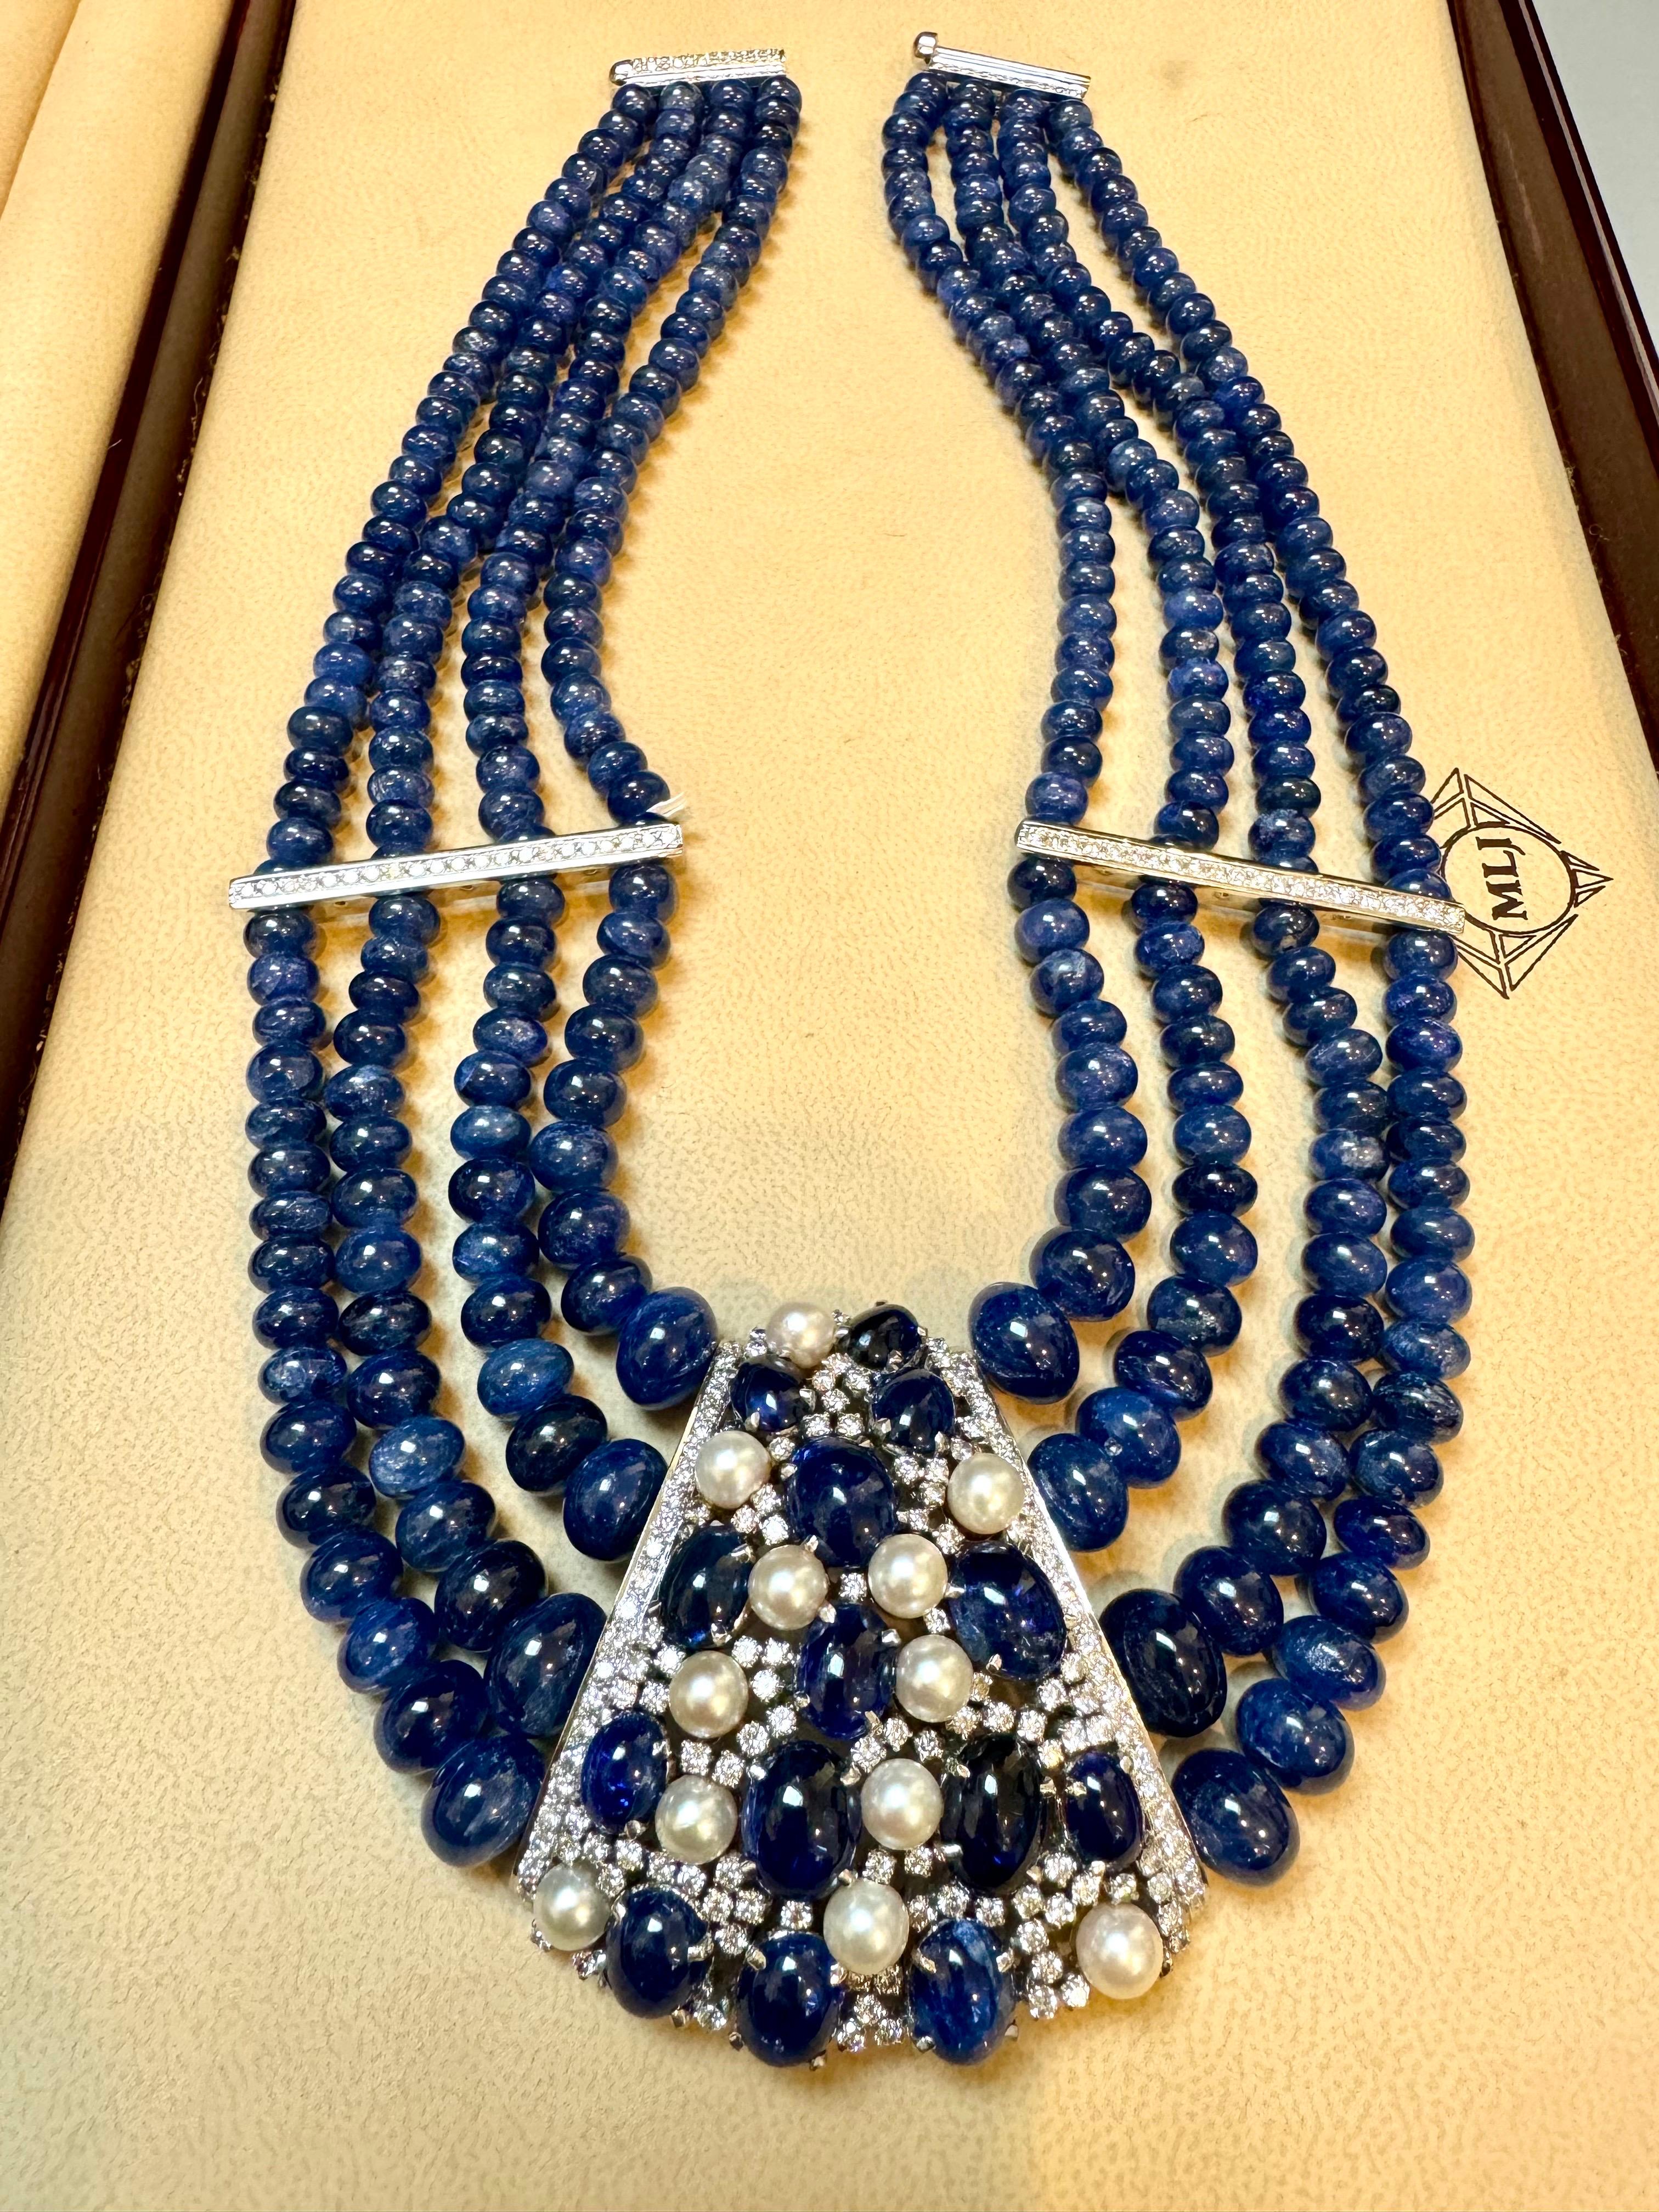 700Ct Sapphire Bead Necklace with cabochon & Diamond Center & Diamond Spacer 18K For Sale 7